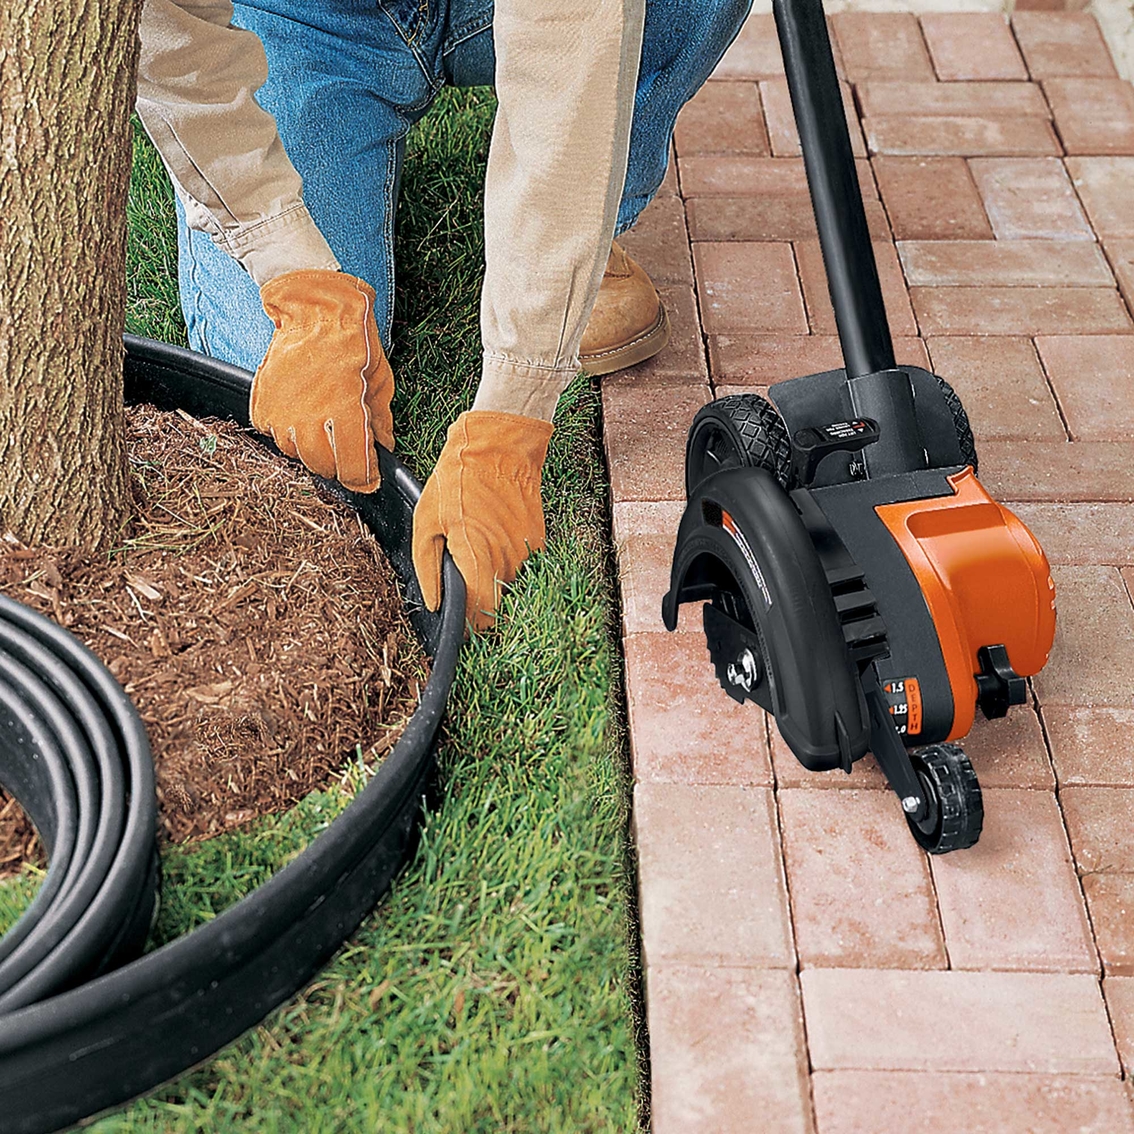 Black + Decker 12A 2 in 1 Landscape Edger and Trencher - Image 3 of 4